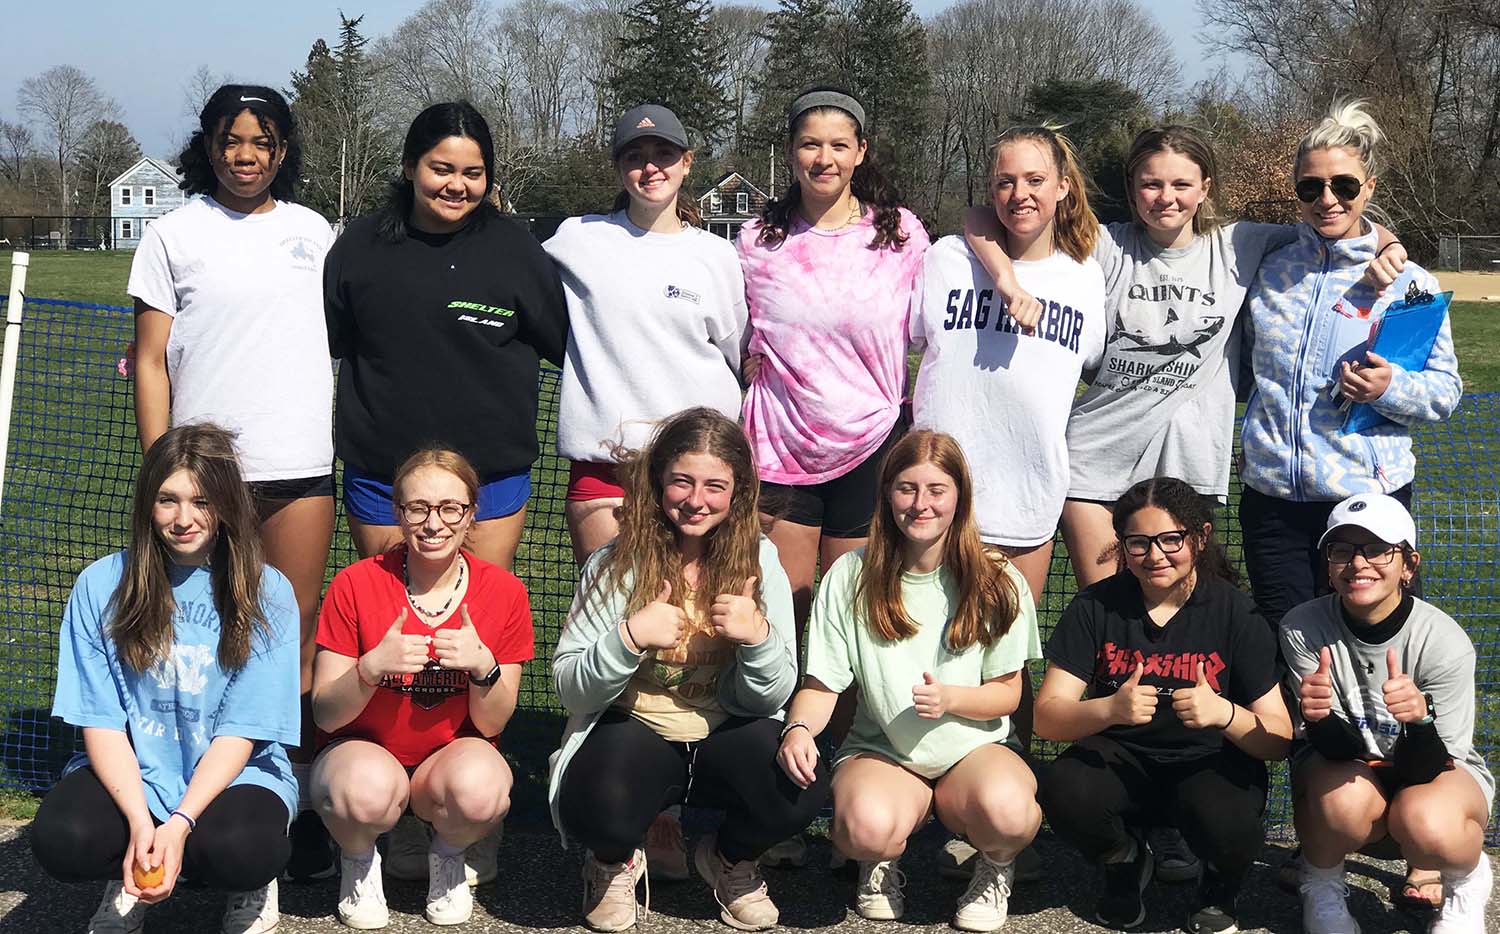 Getting ready for games, and life: Softball coach on learning skills